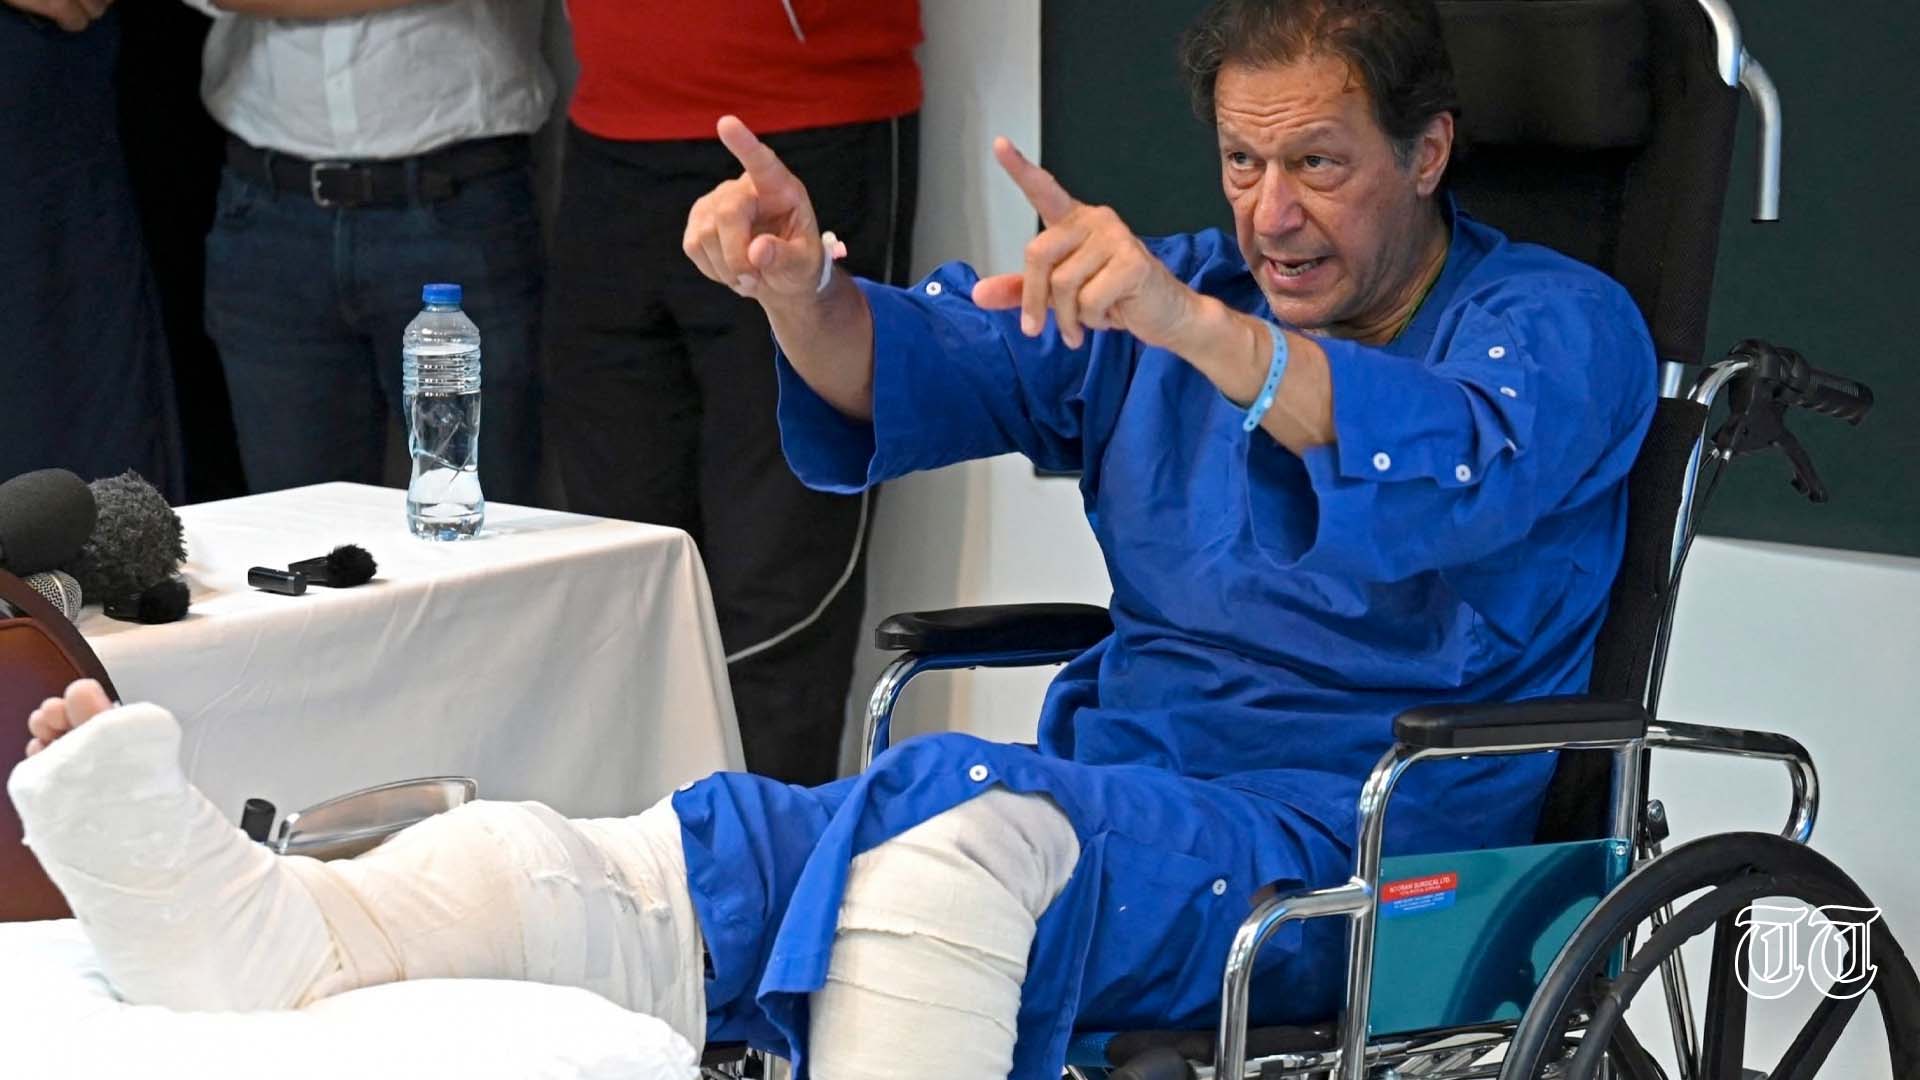 A file photo is shown of PTI president Imran Khan addressing the media at a hospital in Lahore.